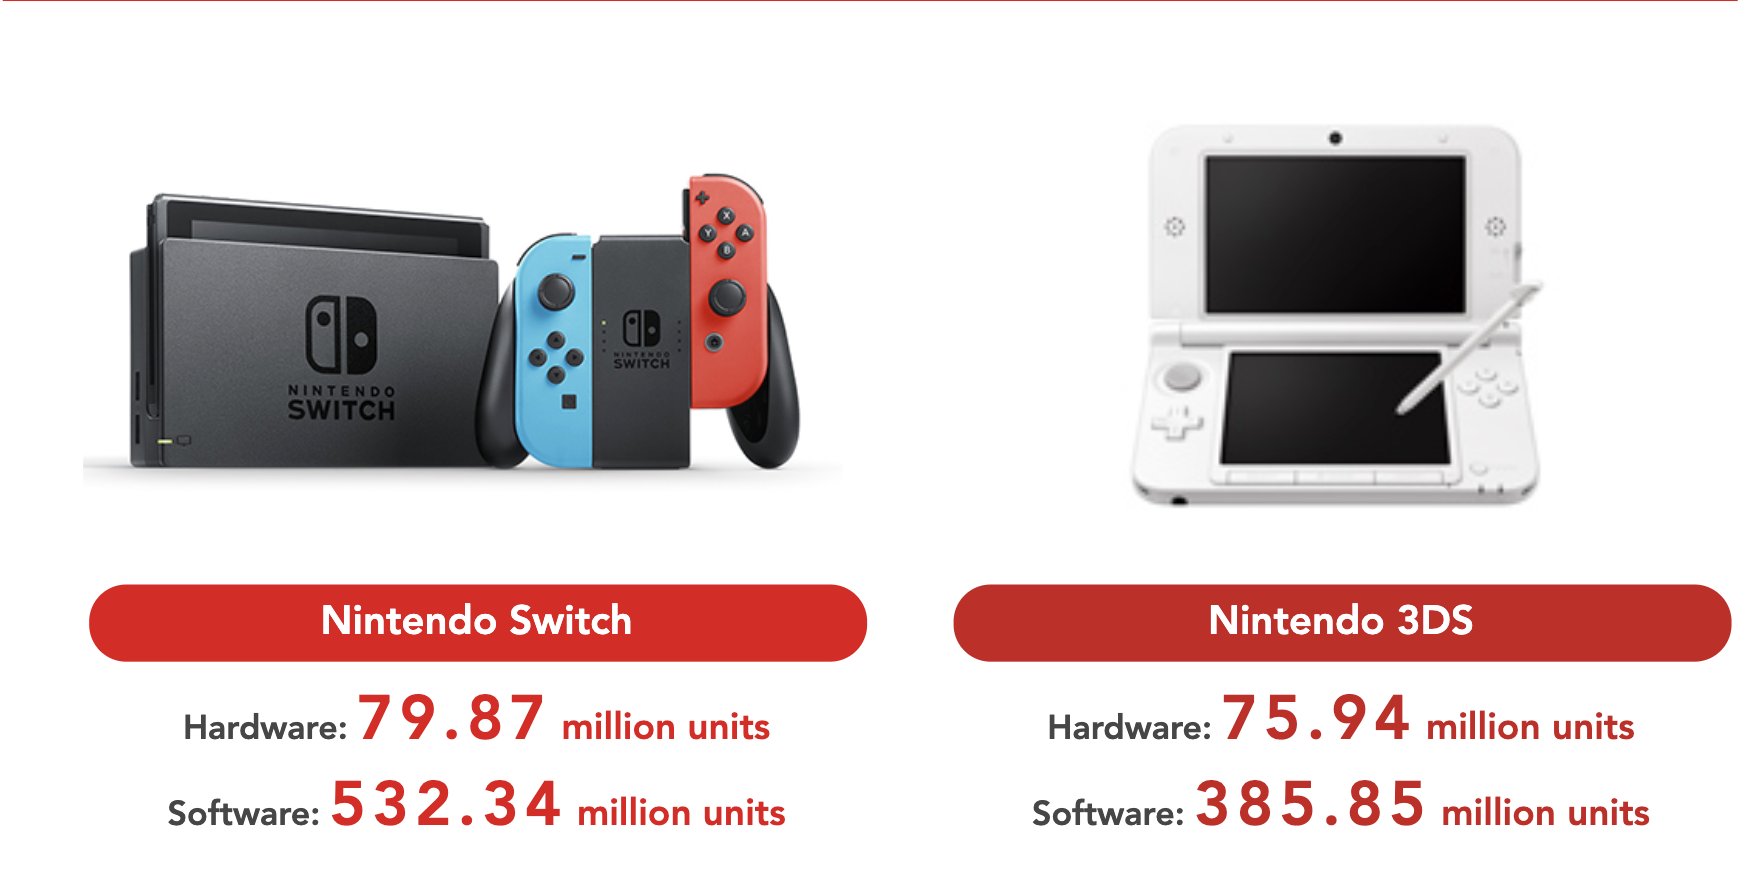 Ahmad on Twitter: "The Nintendo Switch has now sold in 79.87 million units of hardware as of December 31, 2020 This includes 66.34 million Switch units and 13.53 million Switch Lite